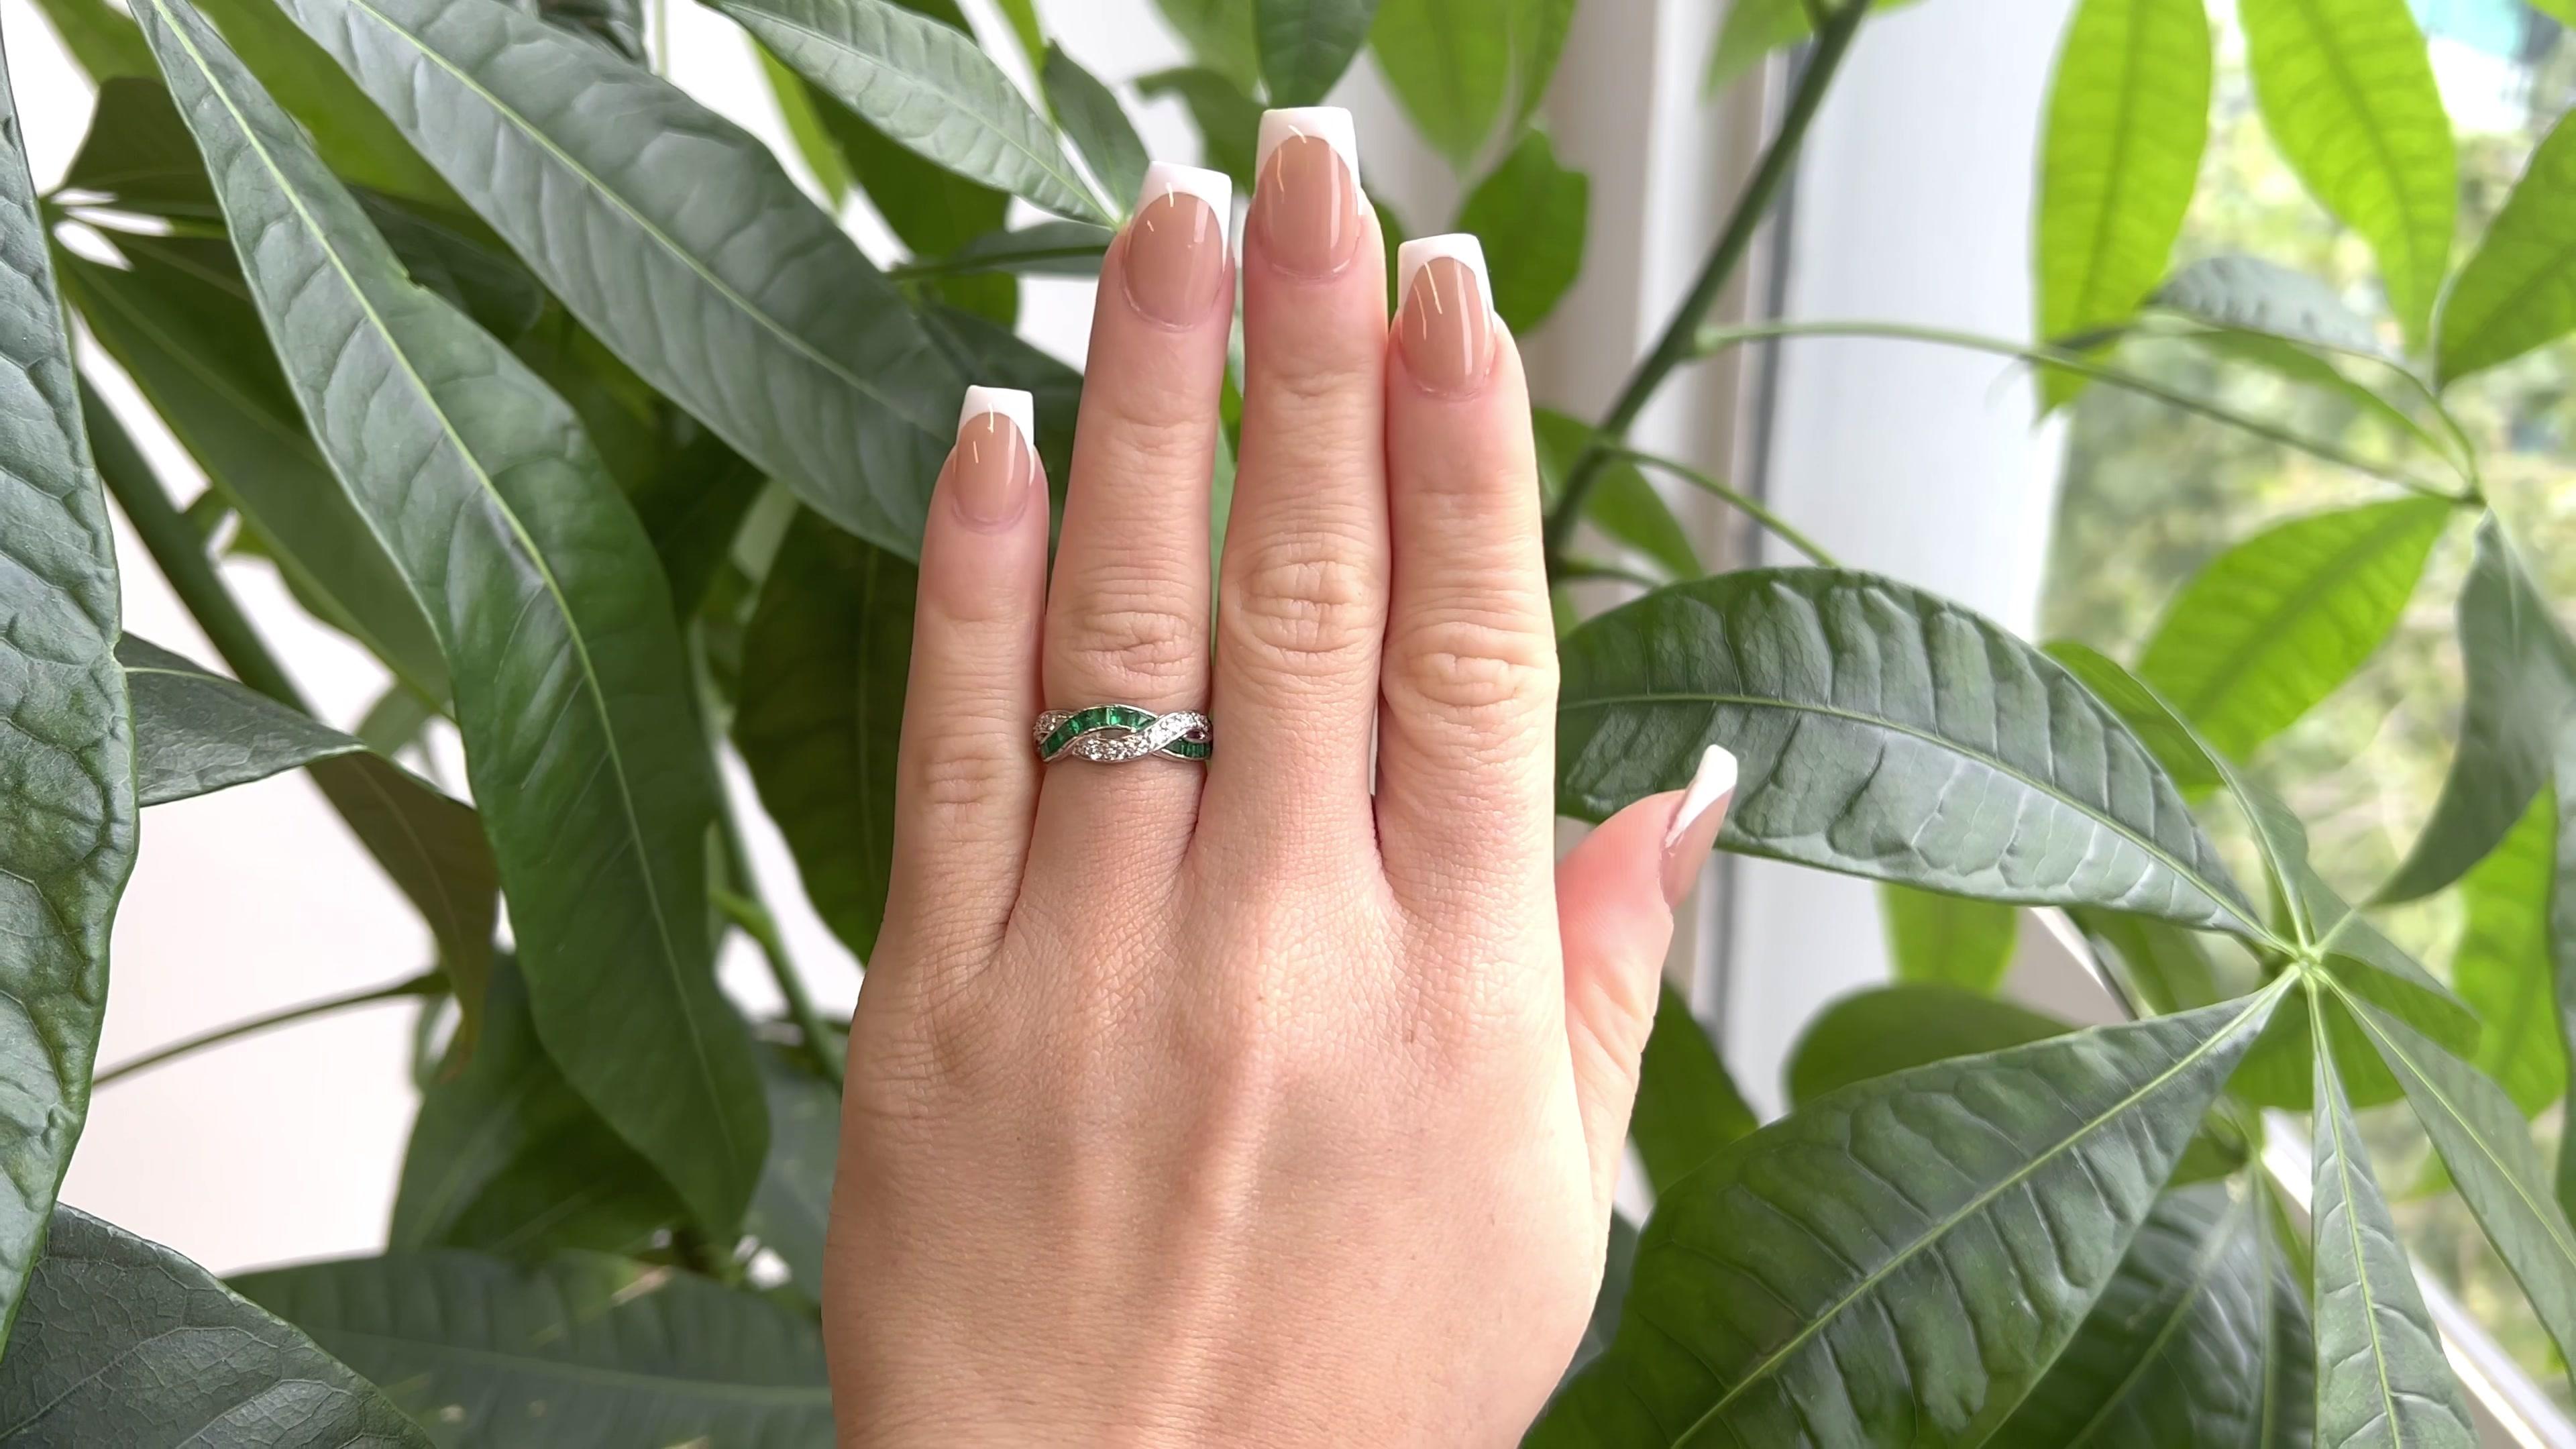 One Mid Century Oscar Heyman Diamond Emerald Platinum Twisted Ring. Featuring 12 round brilliant cut diamonds with a total weight of approximately 0.30 carat, graded D-E color, VVS clarity. Accented by 14 calibré cut emeralds with a total weight of